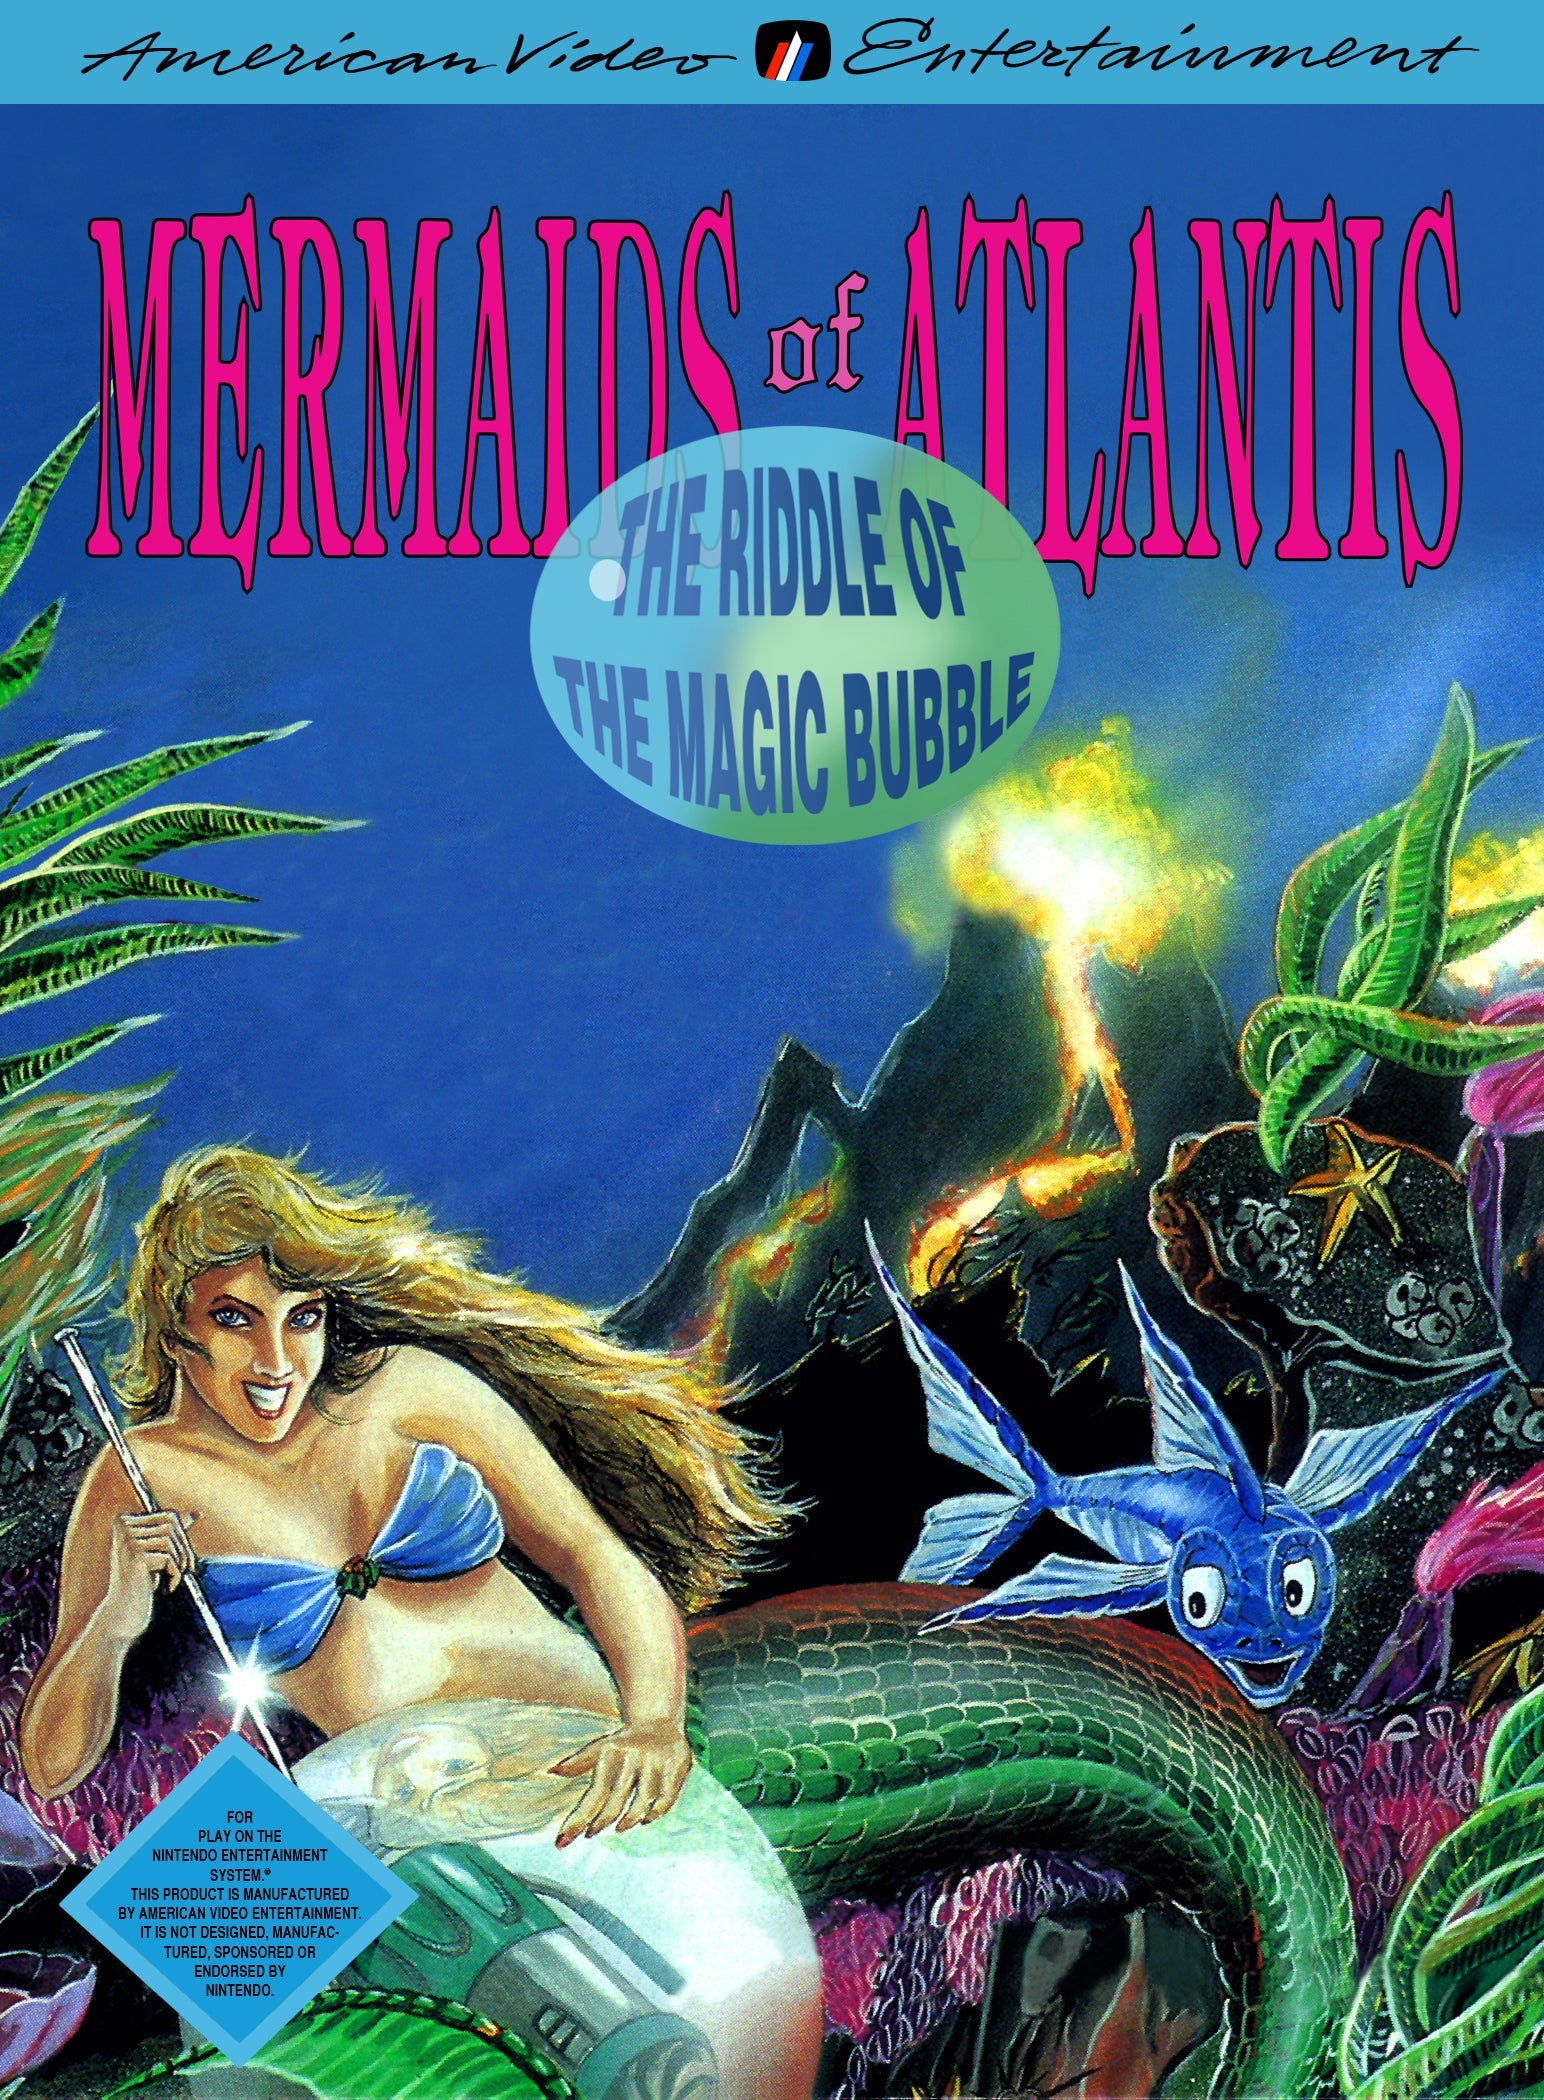 Mermaids of Atlantis Cover Art and Product Photo